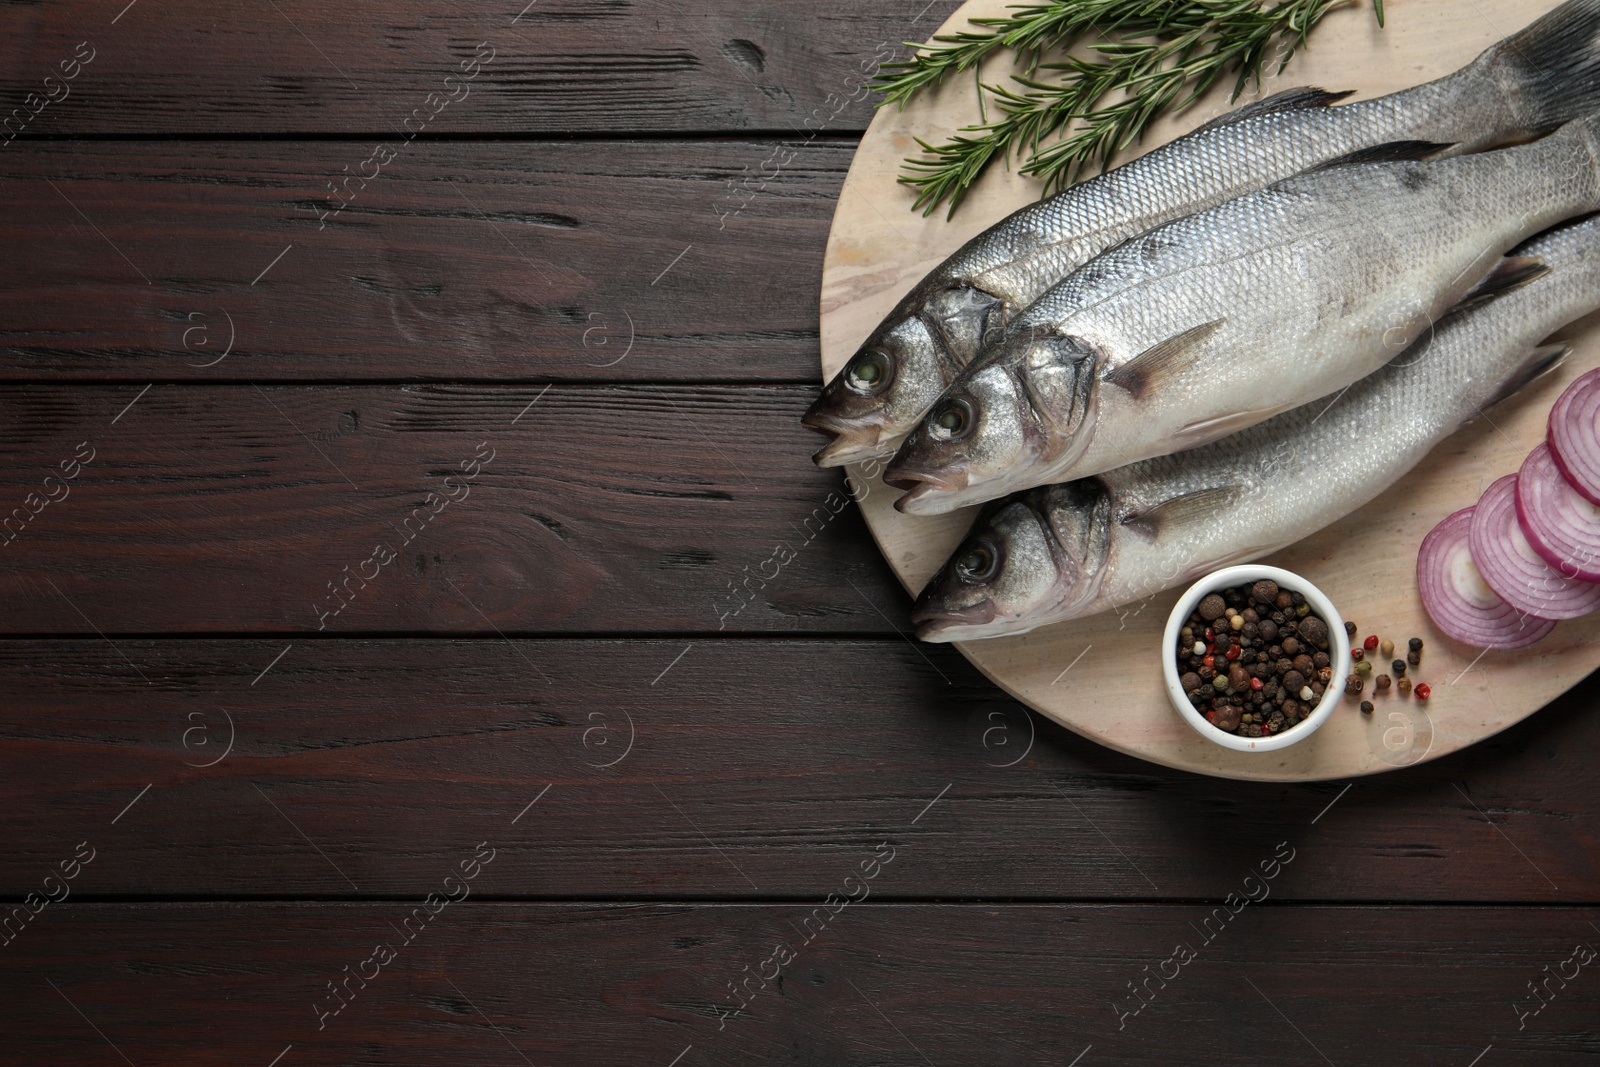 Photo of Sea bass fish and ingredients on wooden table, top view. Space for text